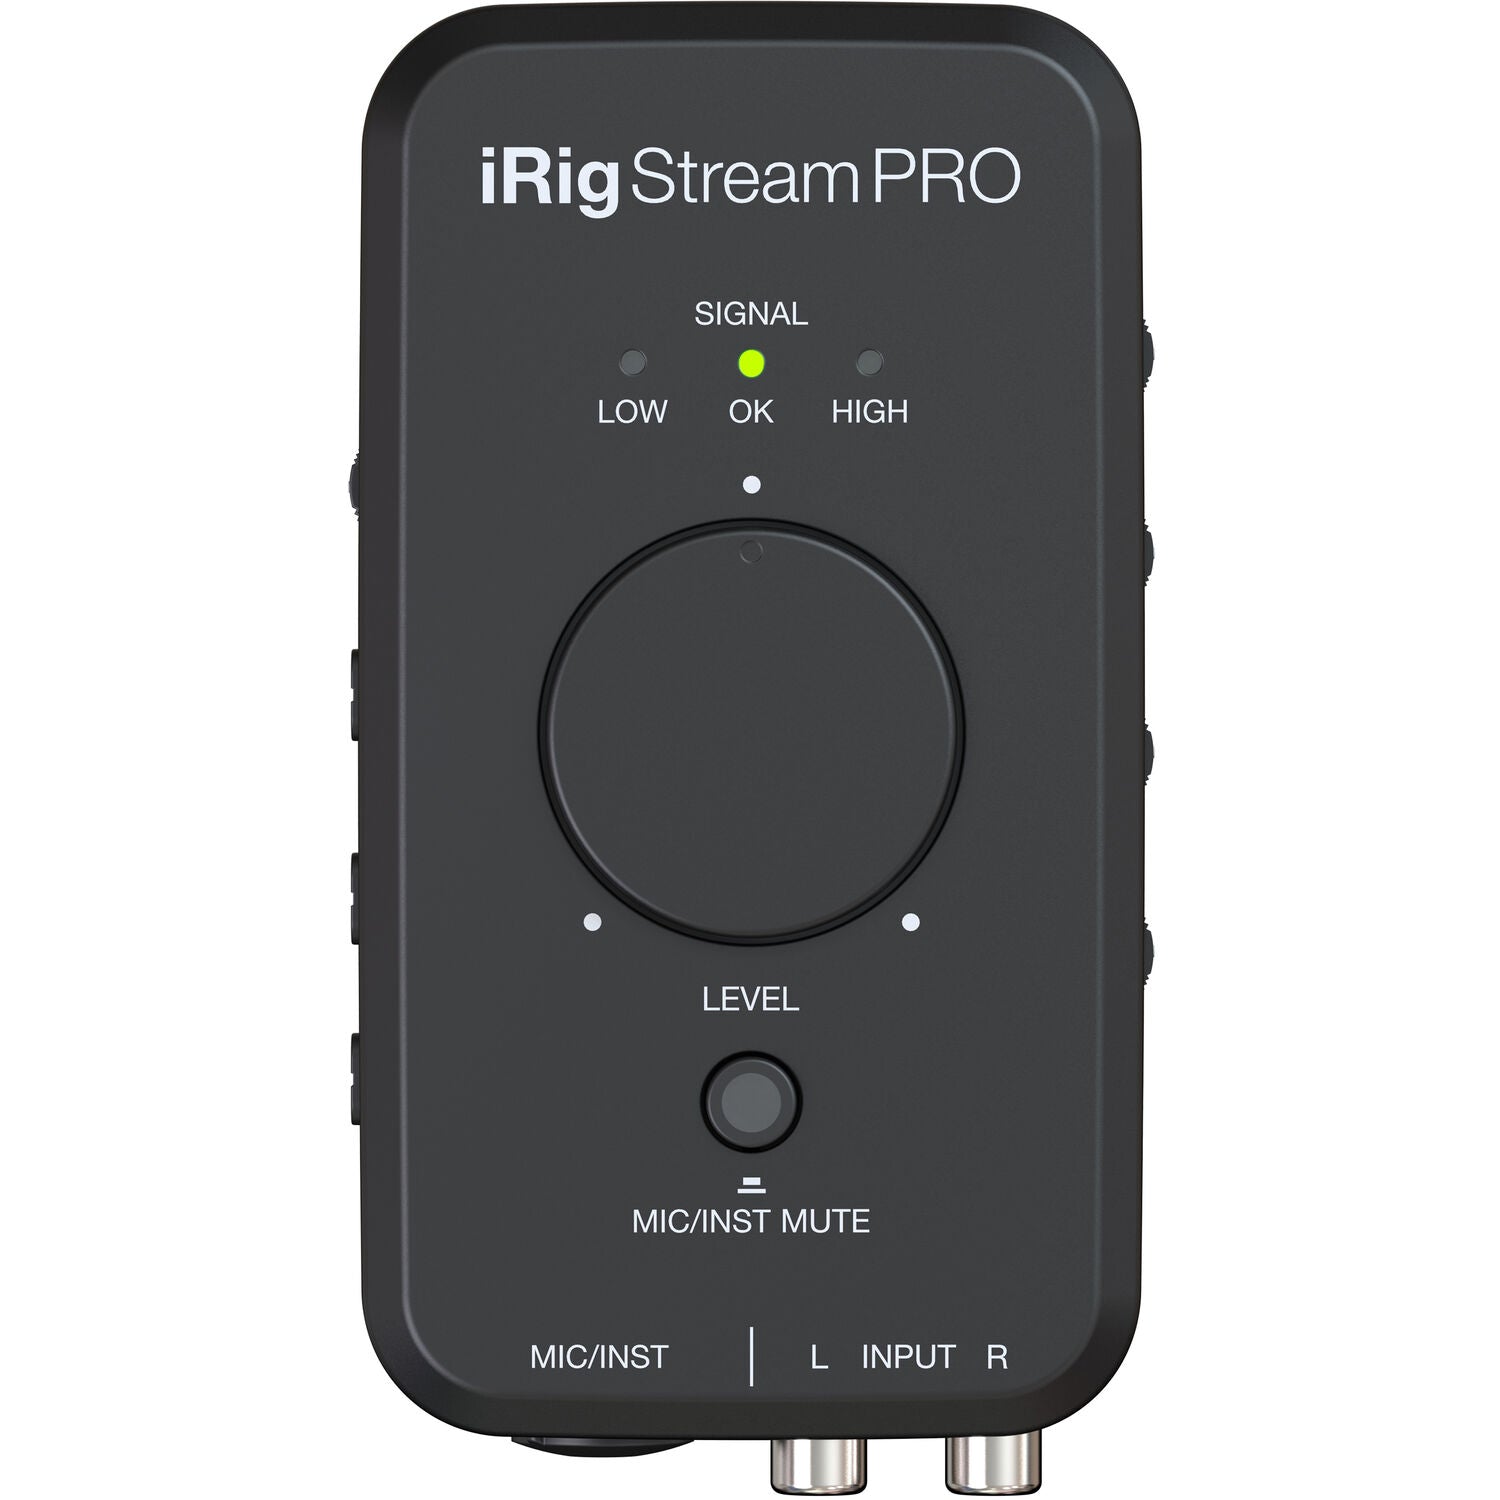  IK Multimedia iRig HD 2 guitar audio interface for iPhone,  iPad, Mac, iOS and PC with USB-C, Lightning and USB cables and 24-bit, 96  kHz music recording : Musical Instruments